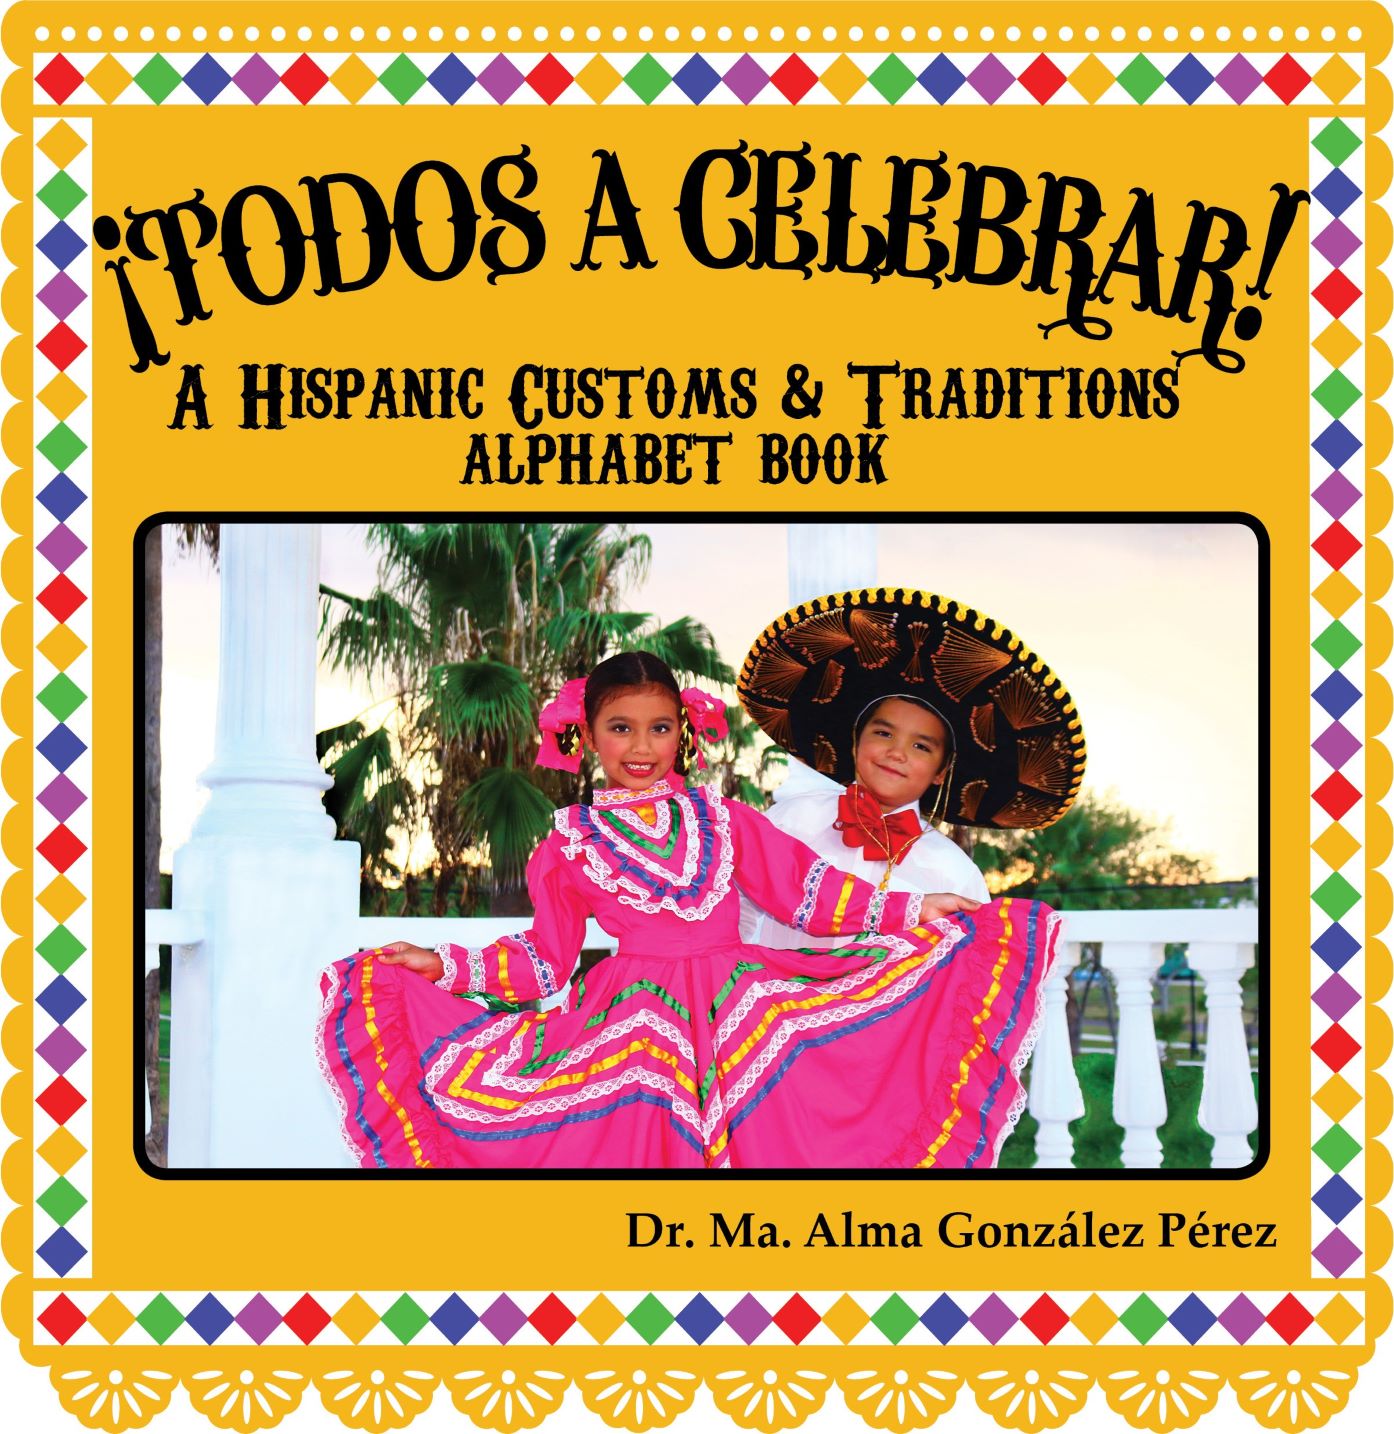 ¡Todos a Celebrar! A New Children’s Book For Your Home Library